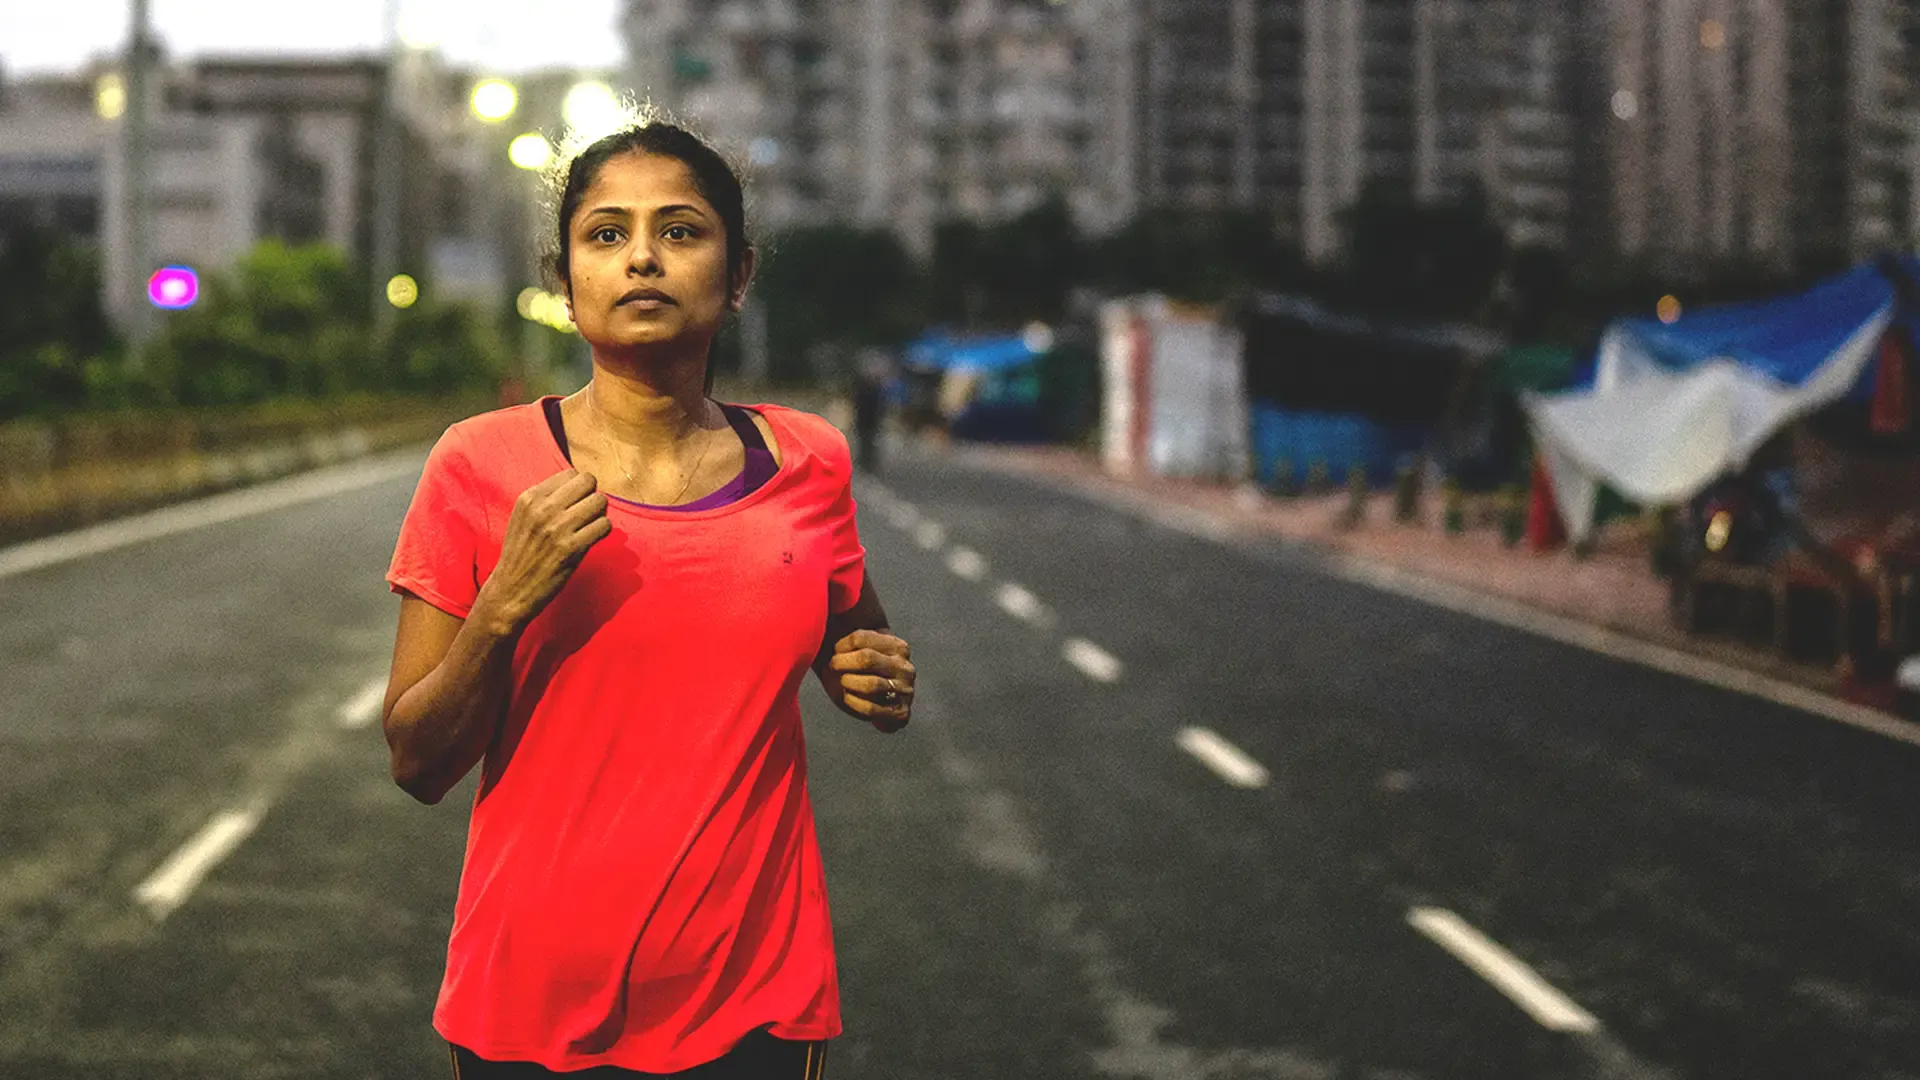 /An Indian lady going for an early morning run on the road